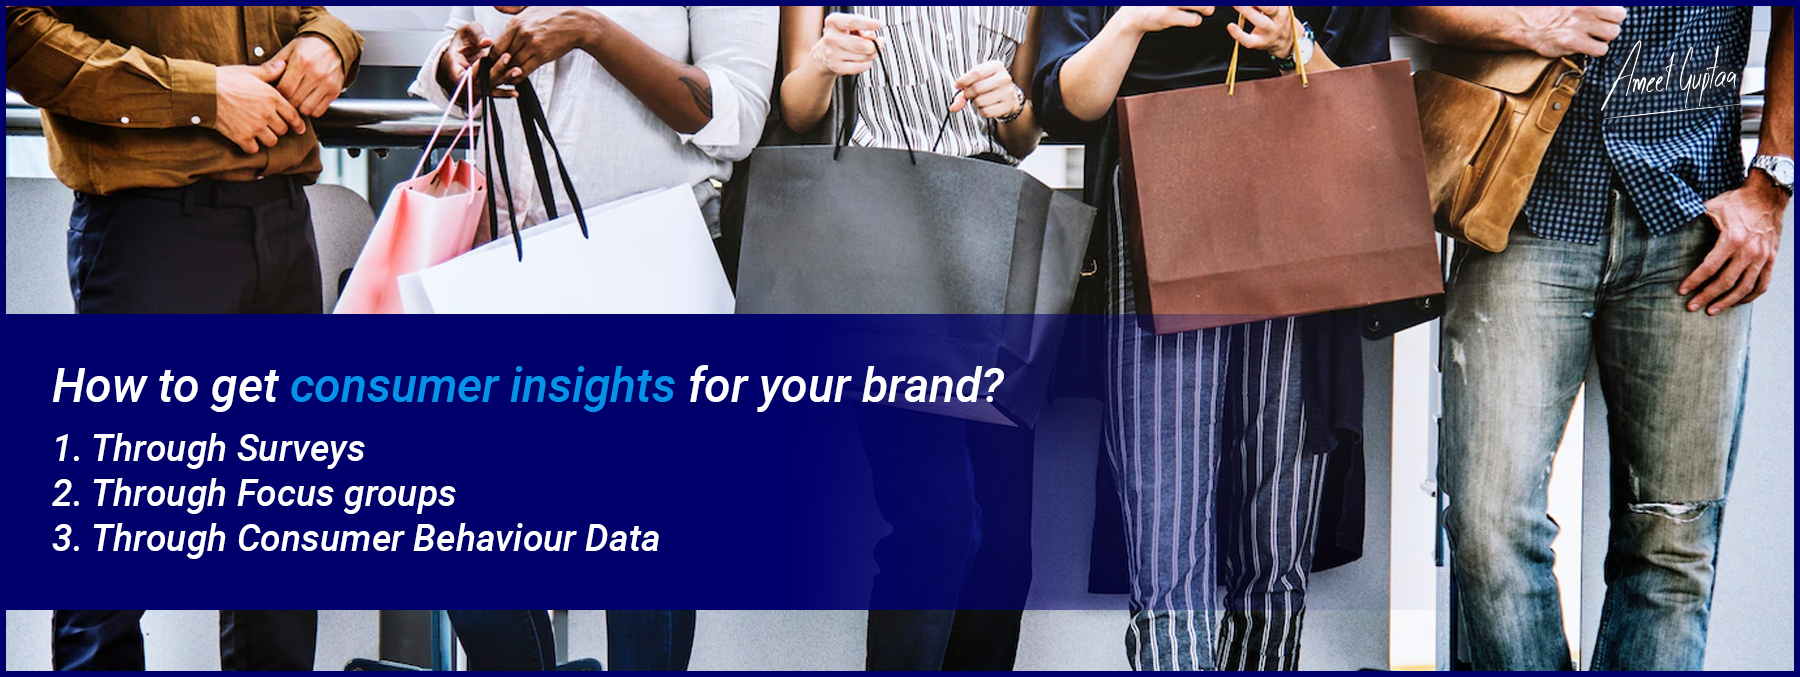 How-to-get-consumer-insights-for-your-brand-Ameet-Guptaa